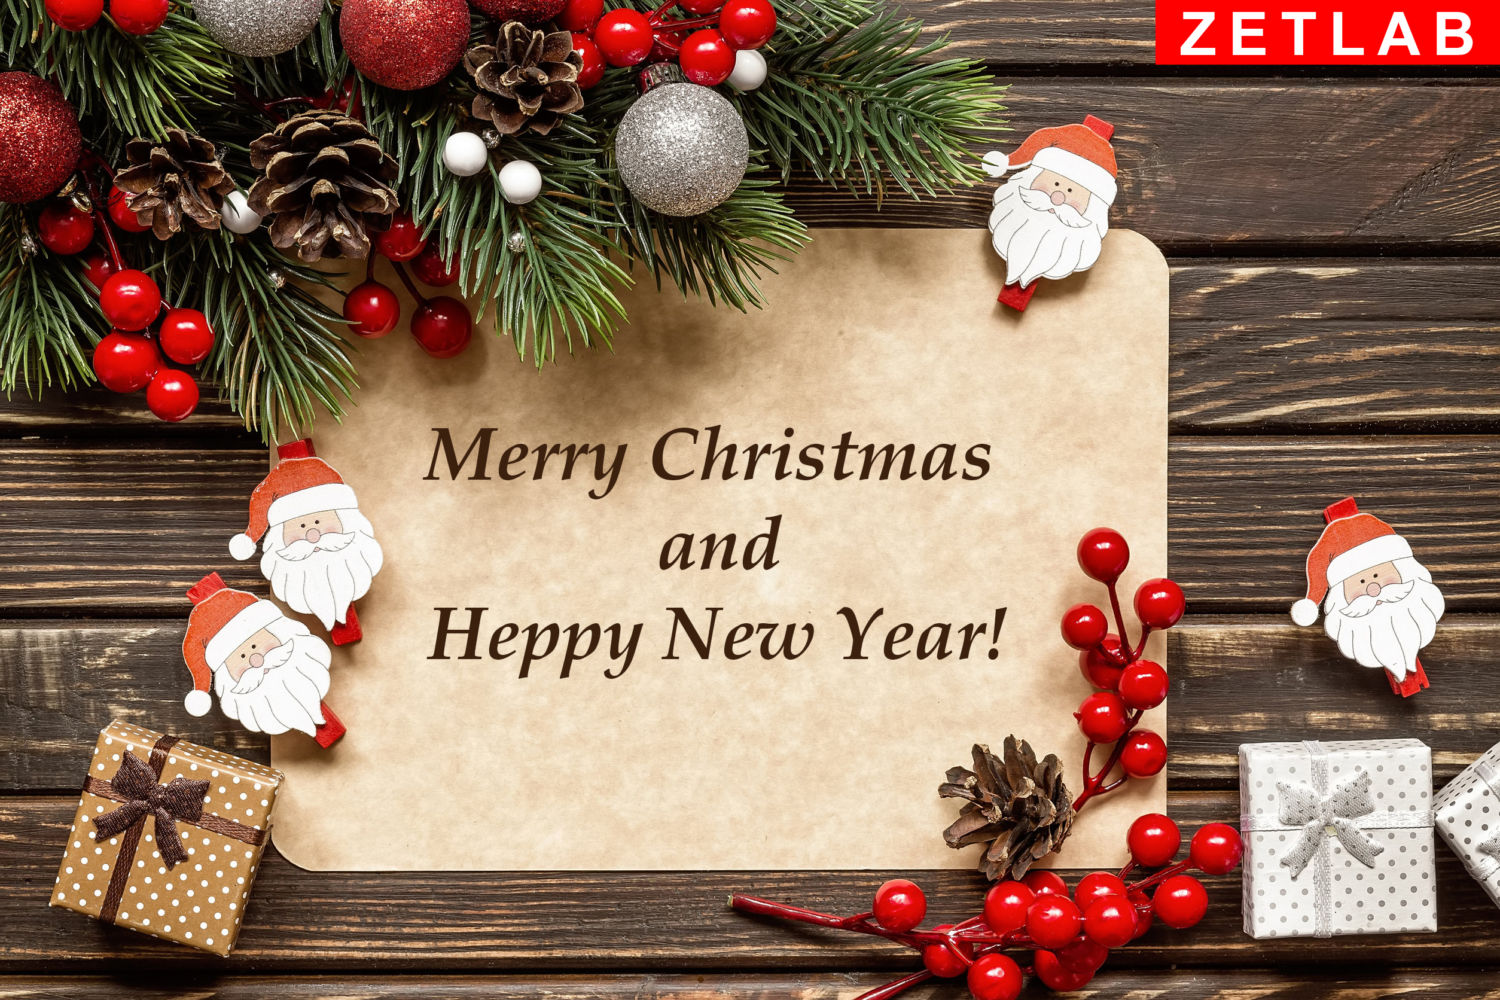 Merry-Christmas-and-Heppy-New-Year-2022-1500x1000